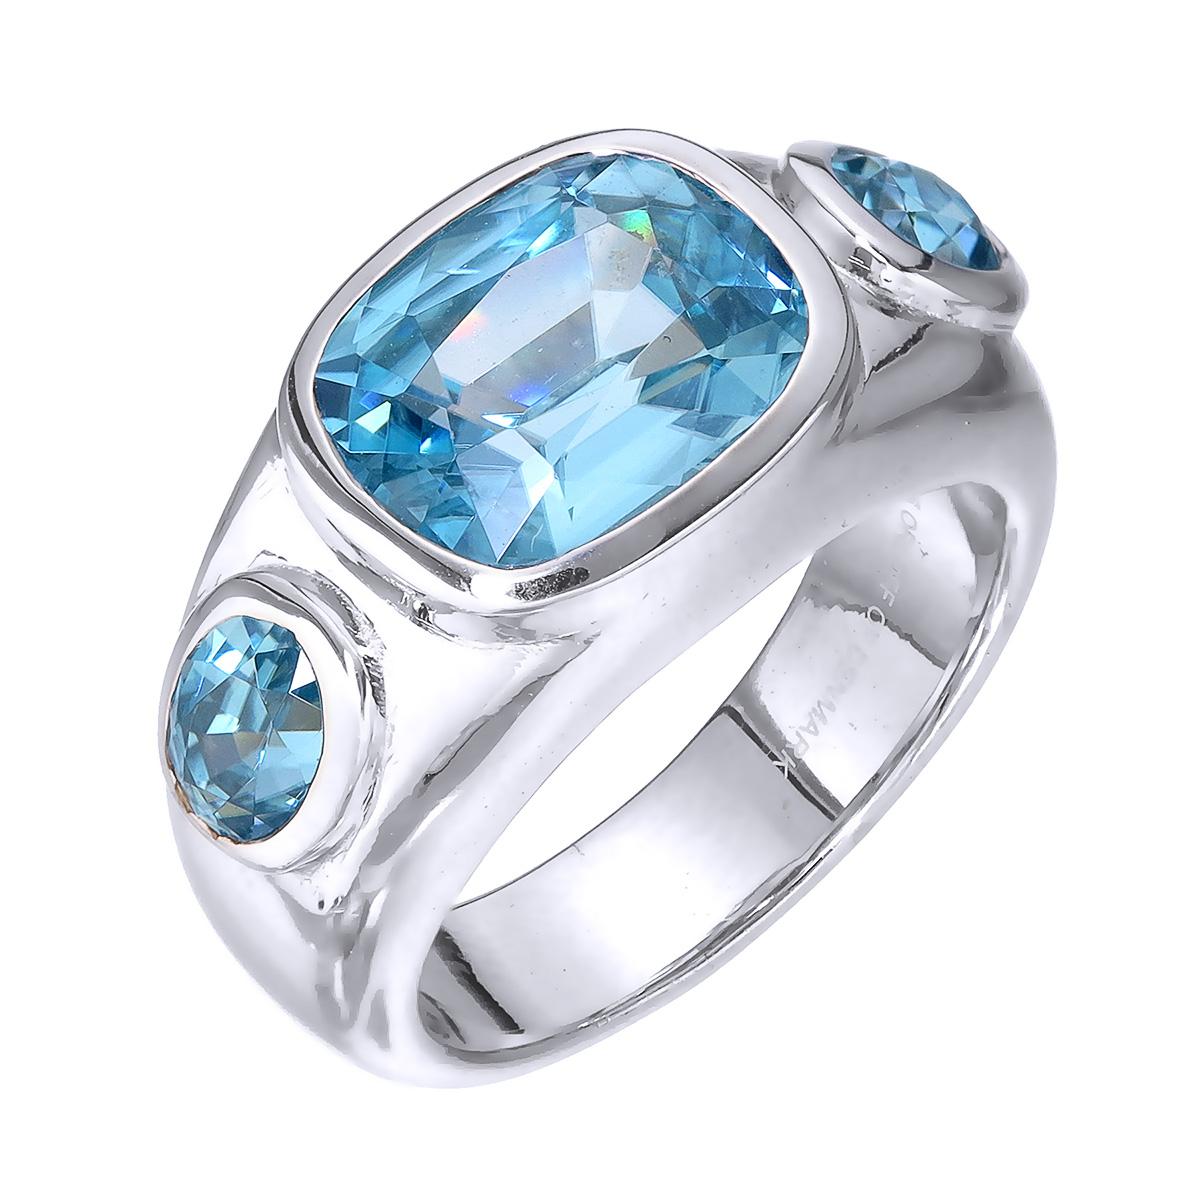 Orloff of Denmark; 925 Sterling Silver Ring set with three Natural Cambodian Blue Zircons totaling to 7.42 carats.

This piece has been meticulously hand-crafted out of 925 sterling silver.
In the center sits a 7.42 carat sky blue zircon mined,